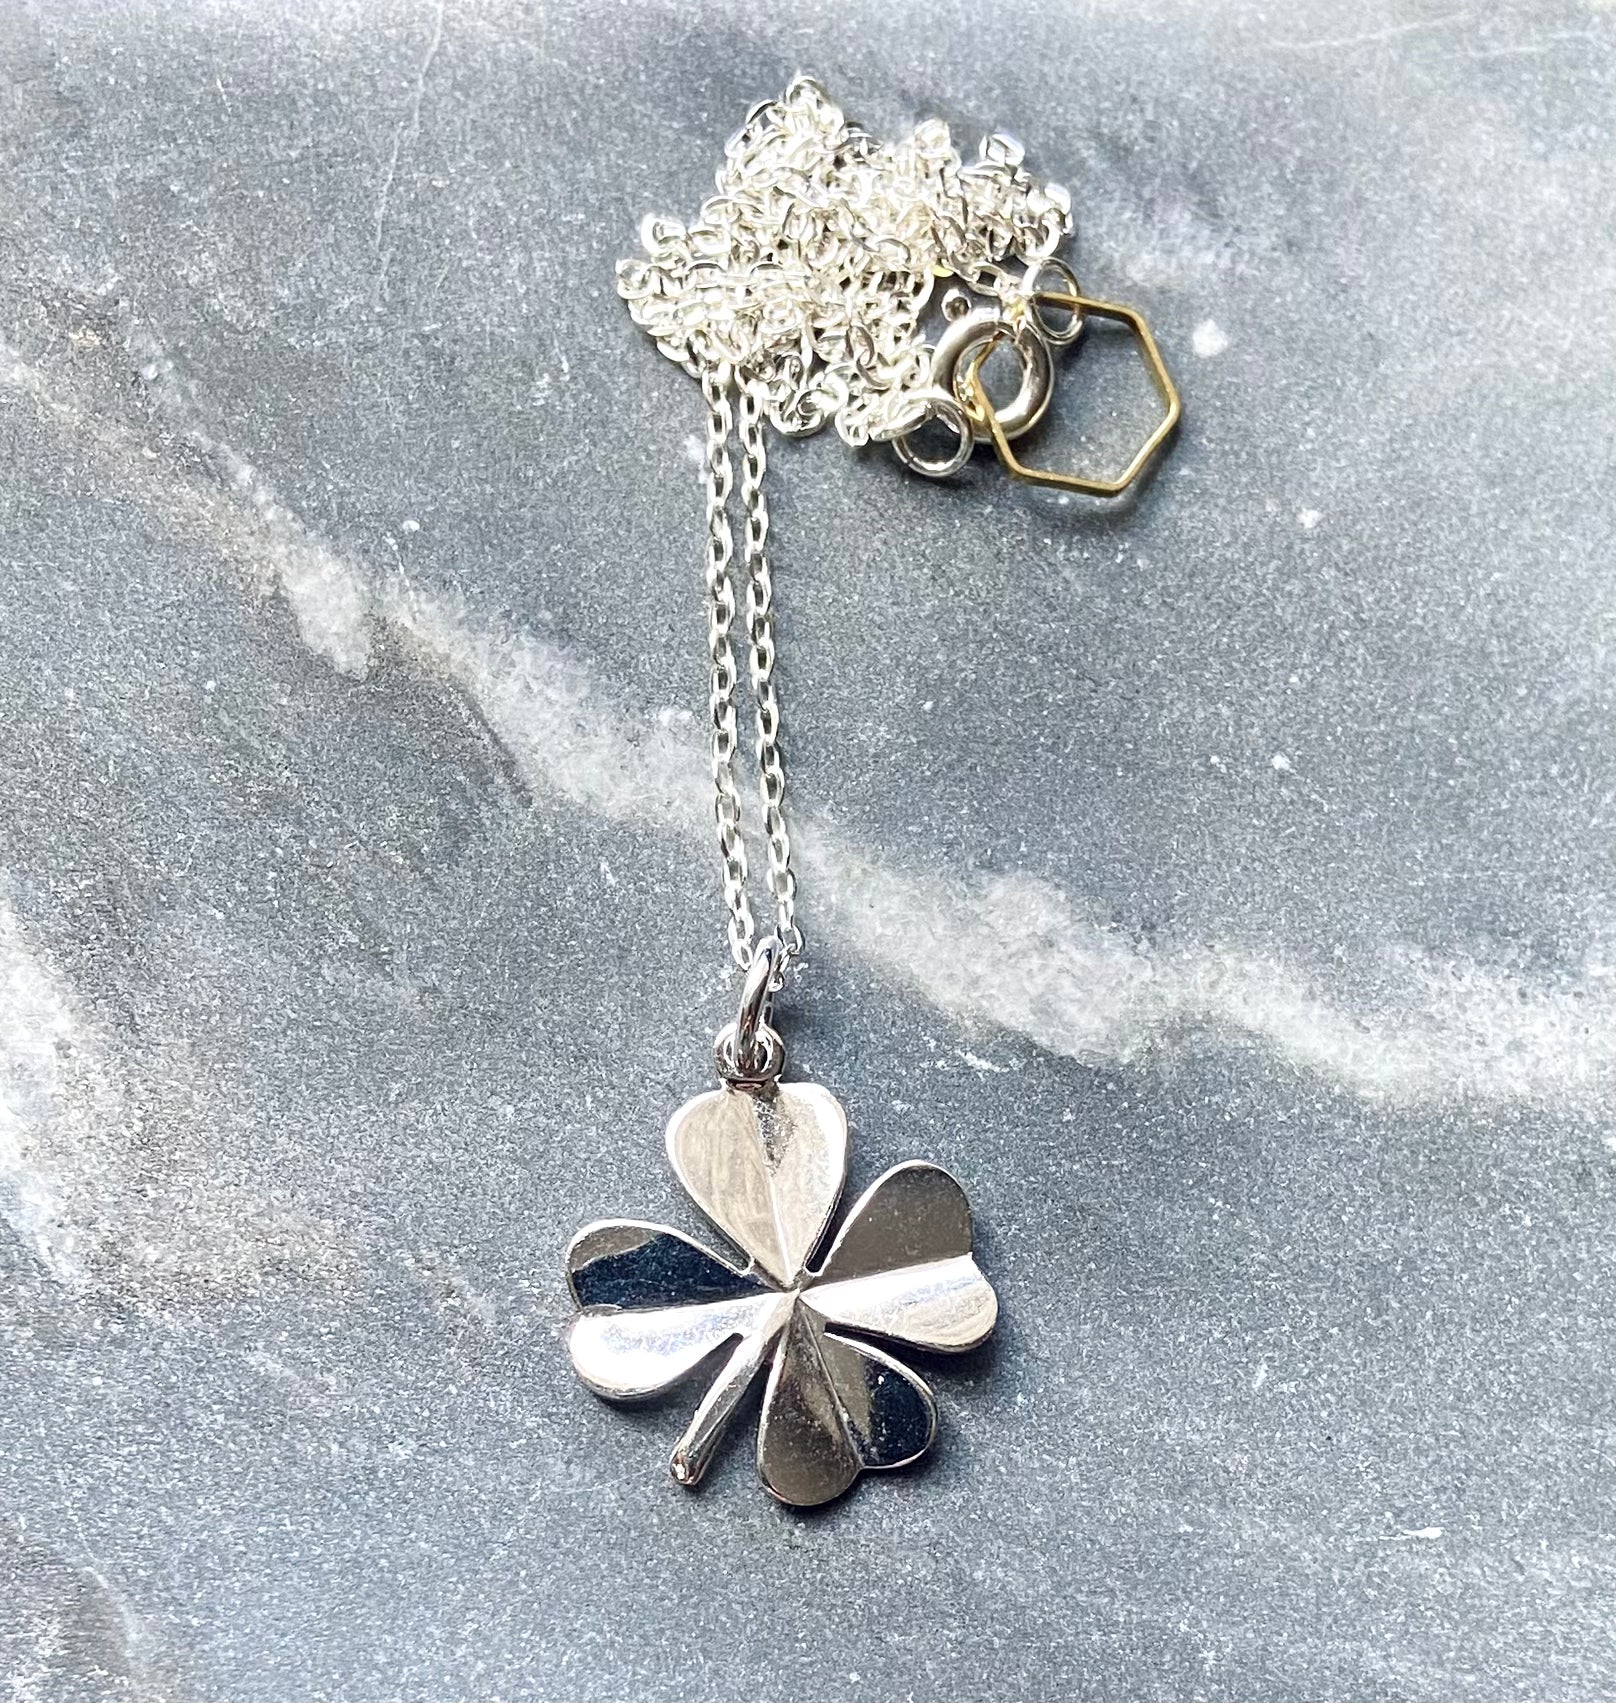 Four Leaf Clover Sterling Silver Necklace, Lucky Charm Pendant